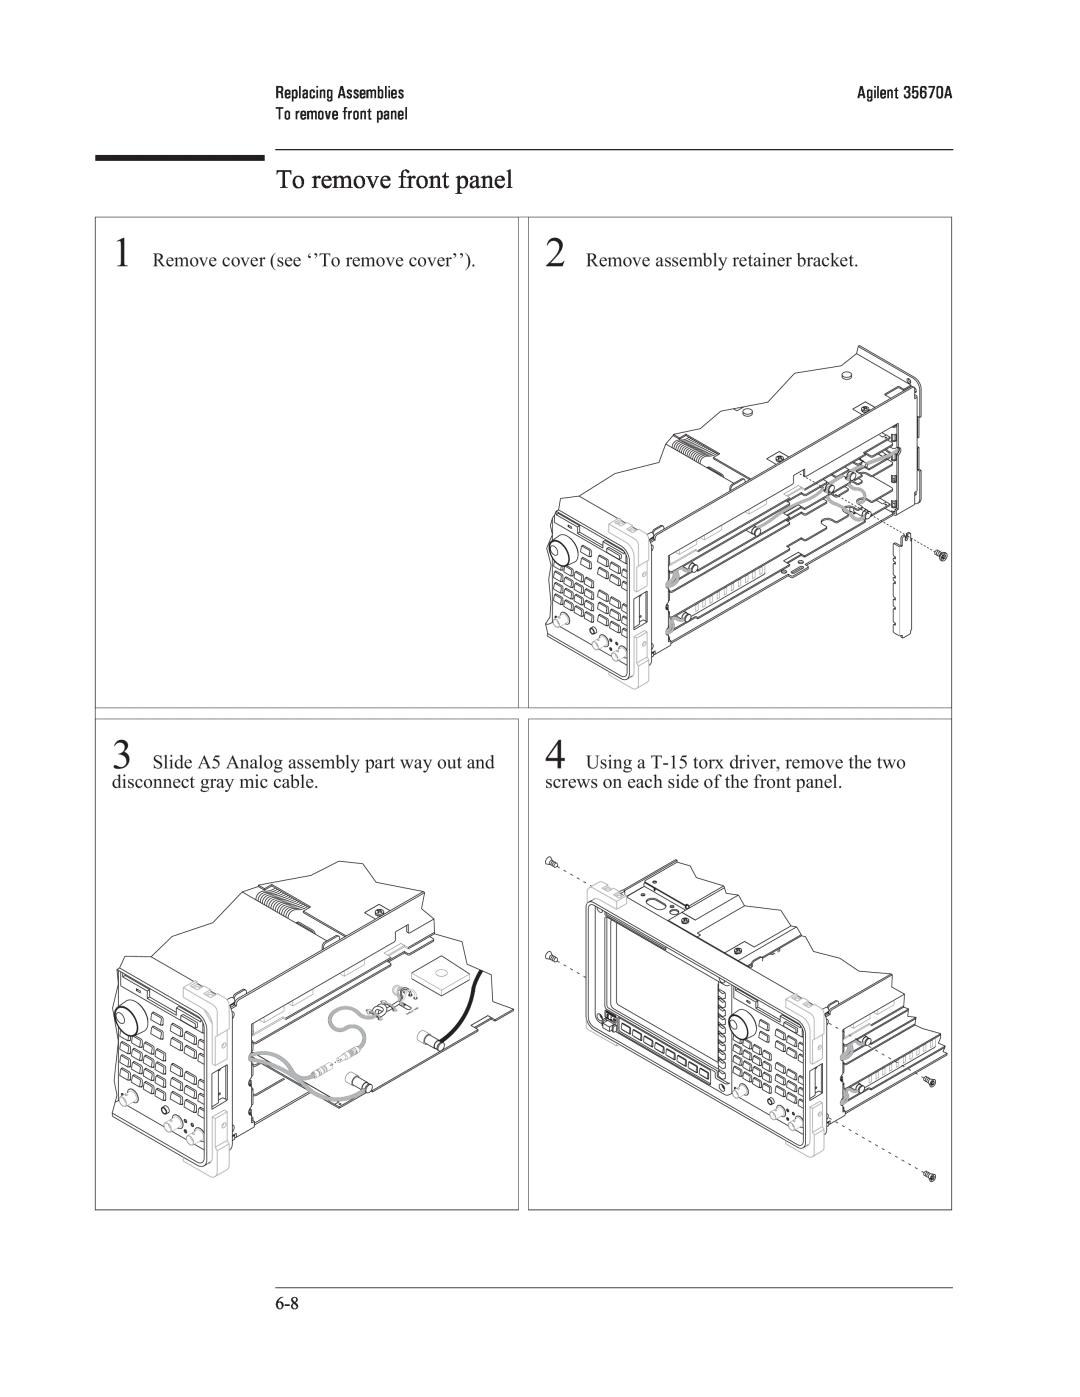 Agilent Technologies 35670-90066 manual To remove front panel, Remove cover see ‘’To remove cover’’, Replacing Assemblies 